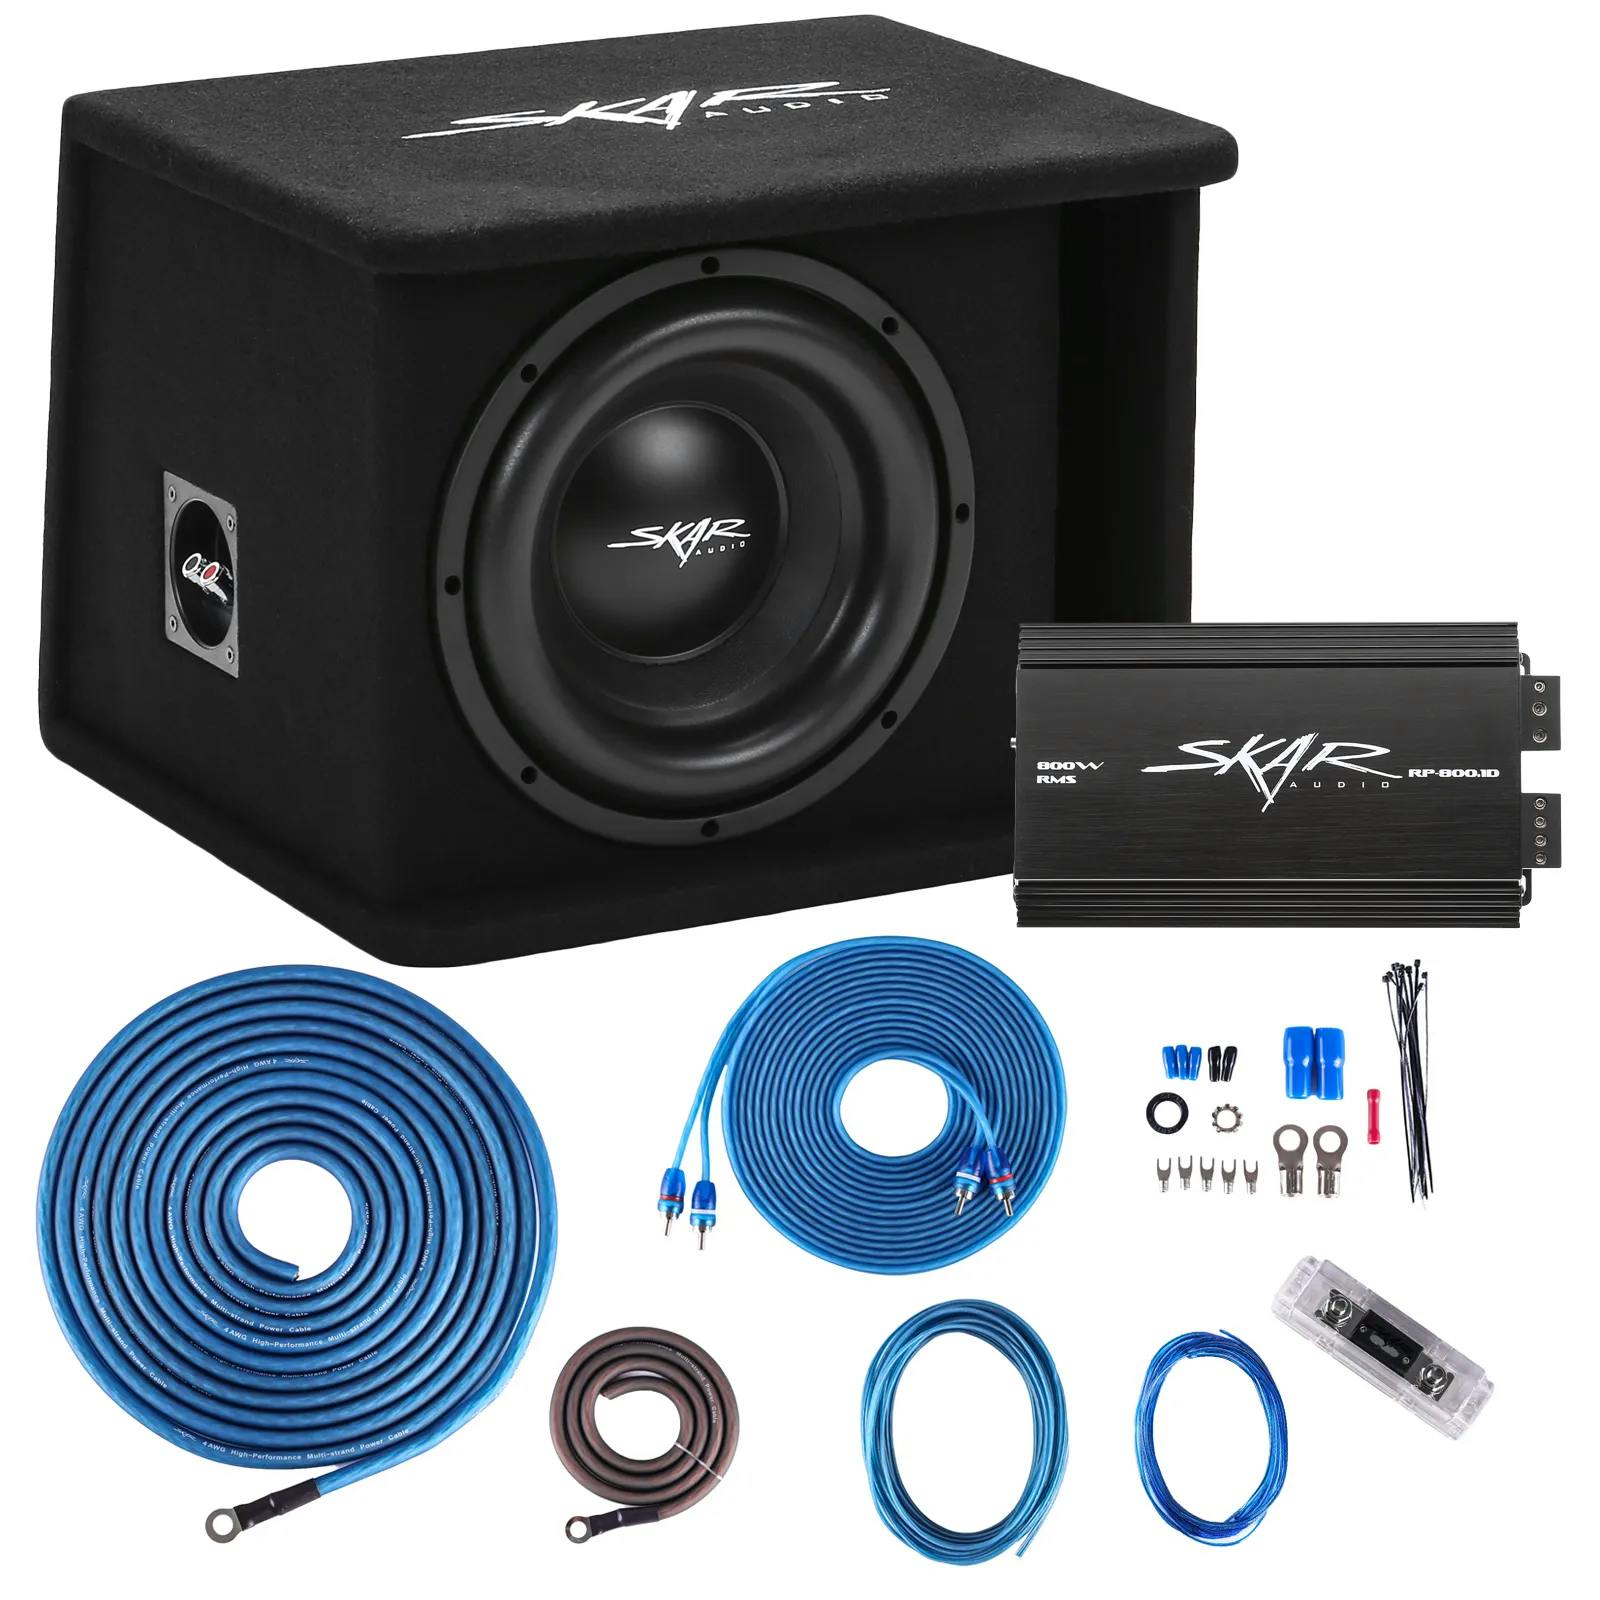 Featured Product Photo for Single 10" 1,200 Watt SDR Series Complete Subwoofer Package with Vented Enclosure and Amplifier